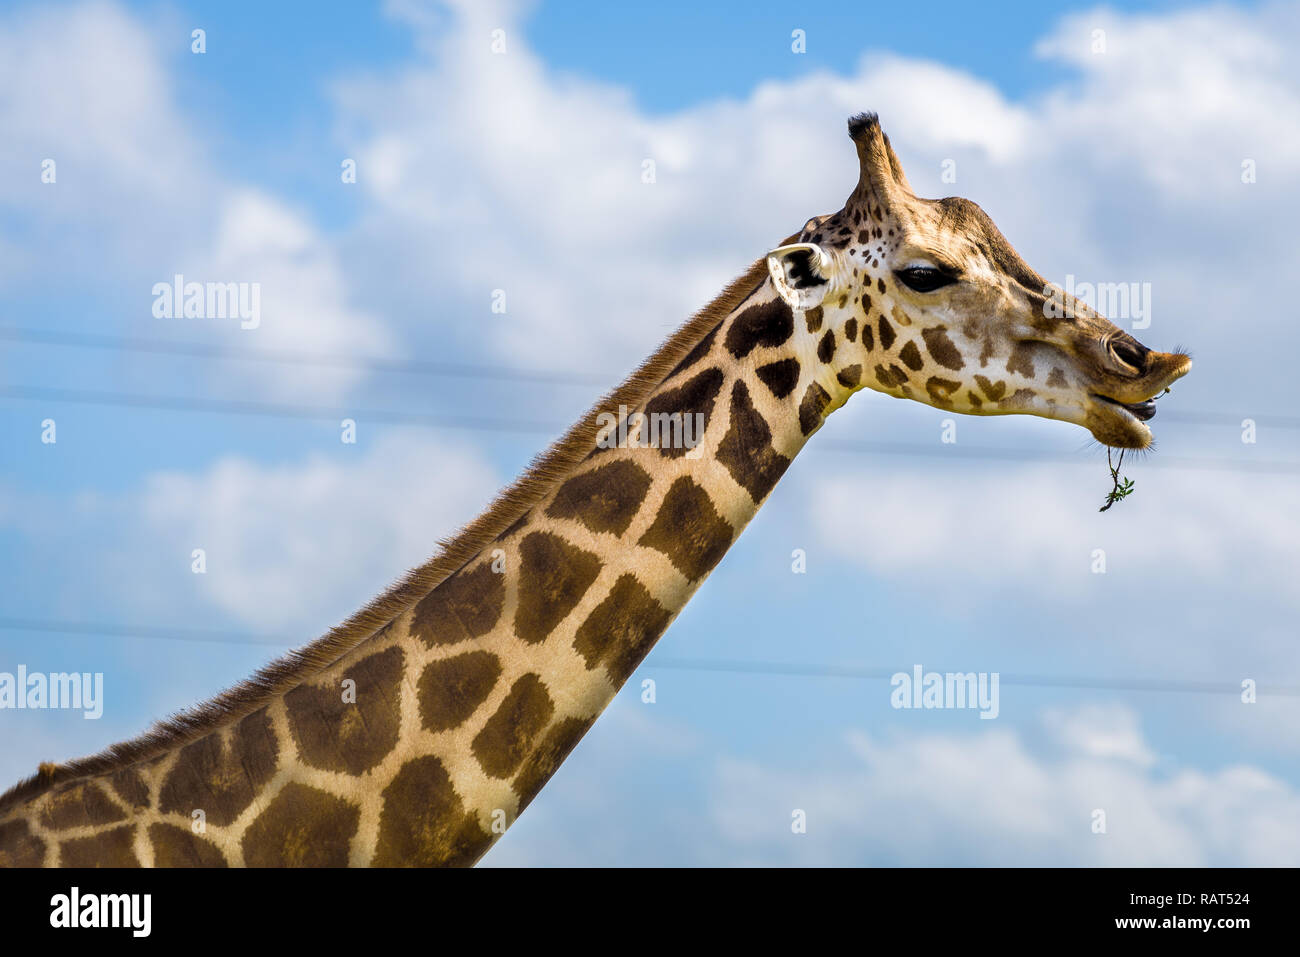 Close up portrait of a funny giraffe eating, isolated against the blue sky. Stock Photo